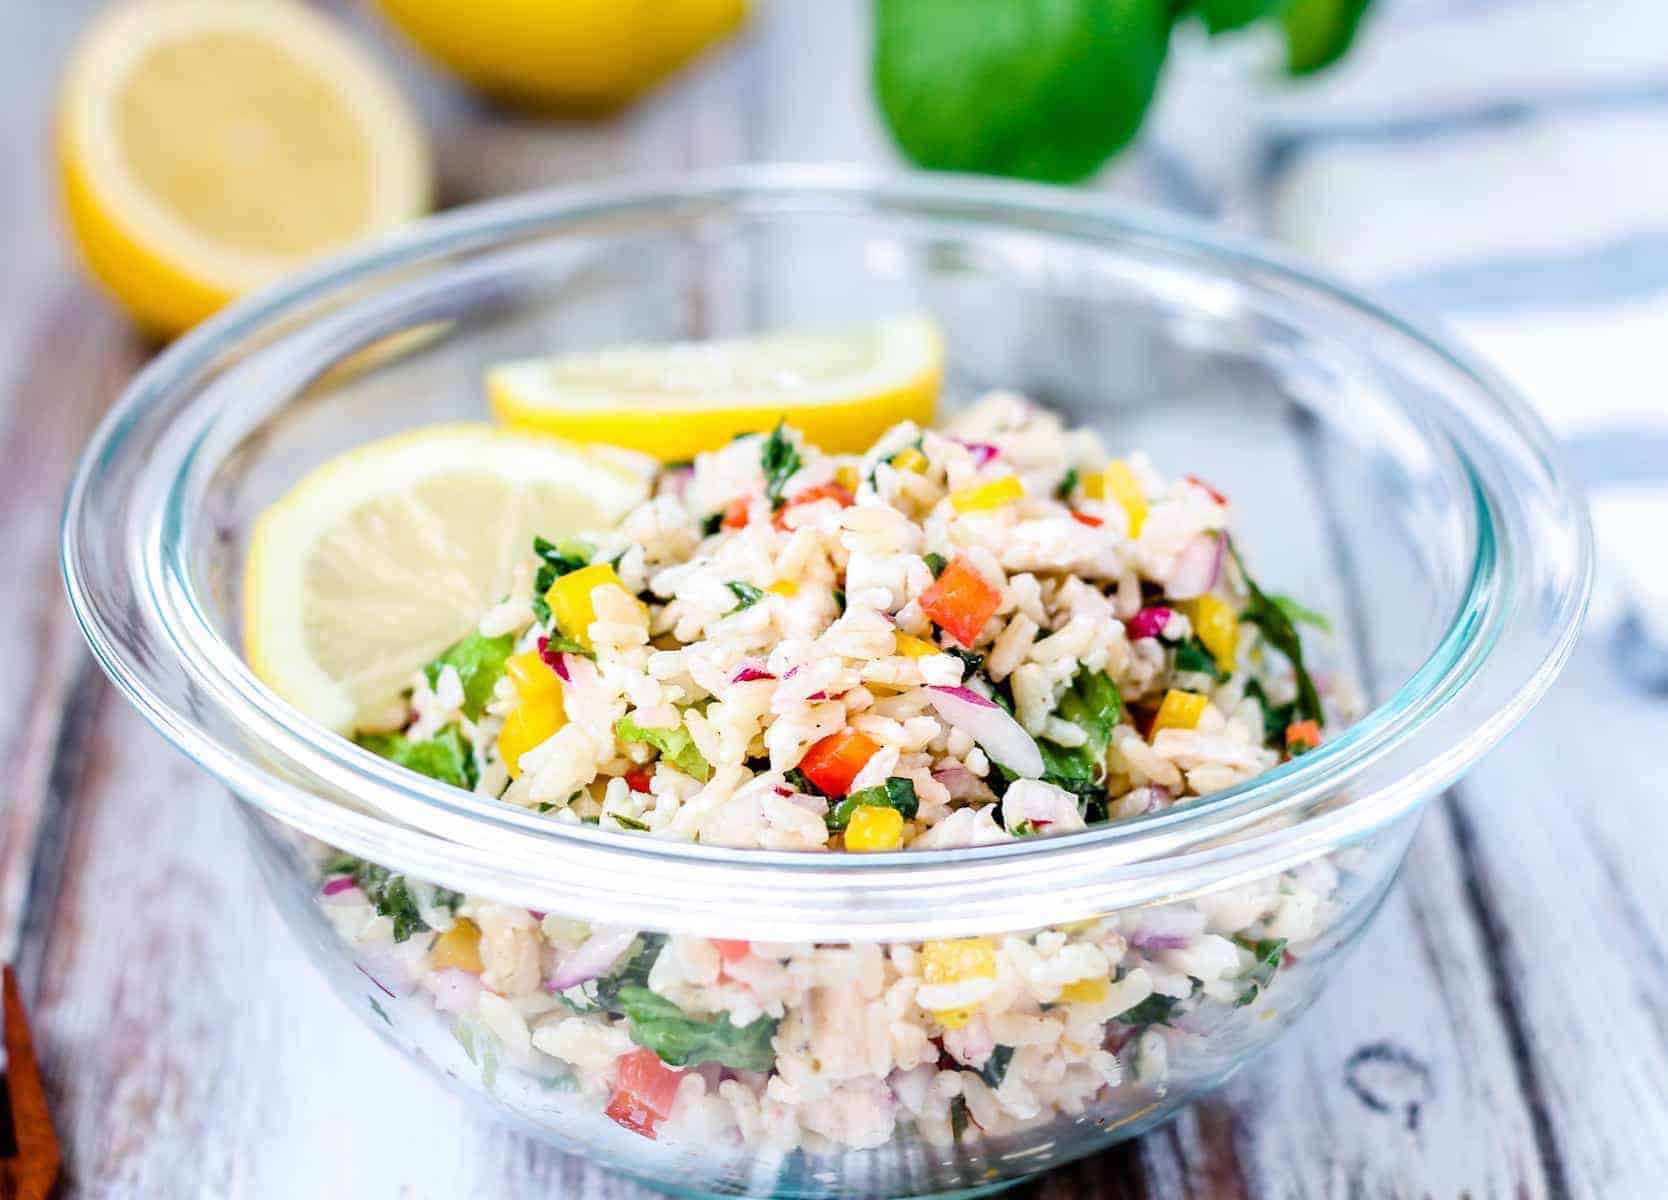 Chicken and rice salad in a glass bowl.